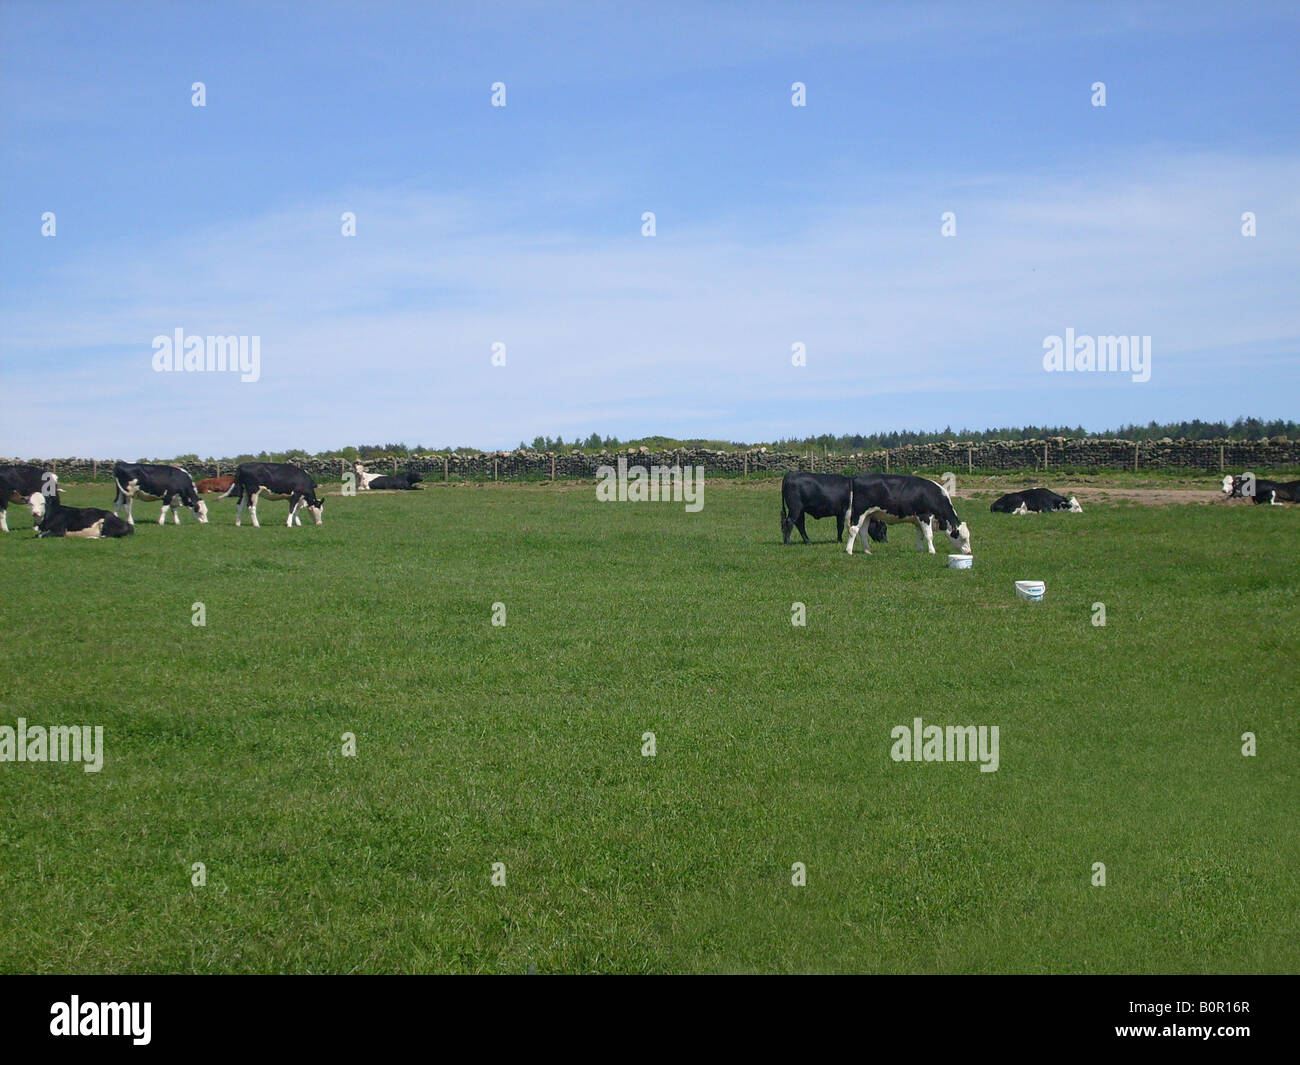 Cows grazing in countryside in rural agriculture scene, North Yorkshire Moors National Park, England. Stock Photo